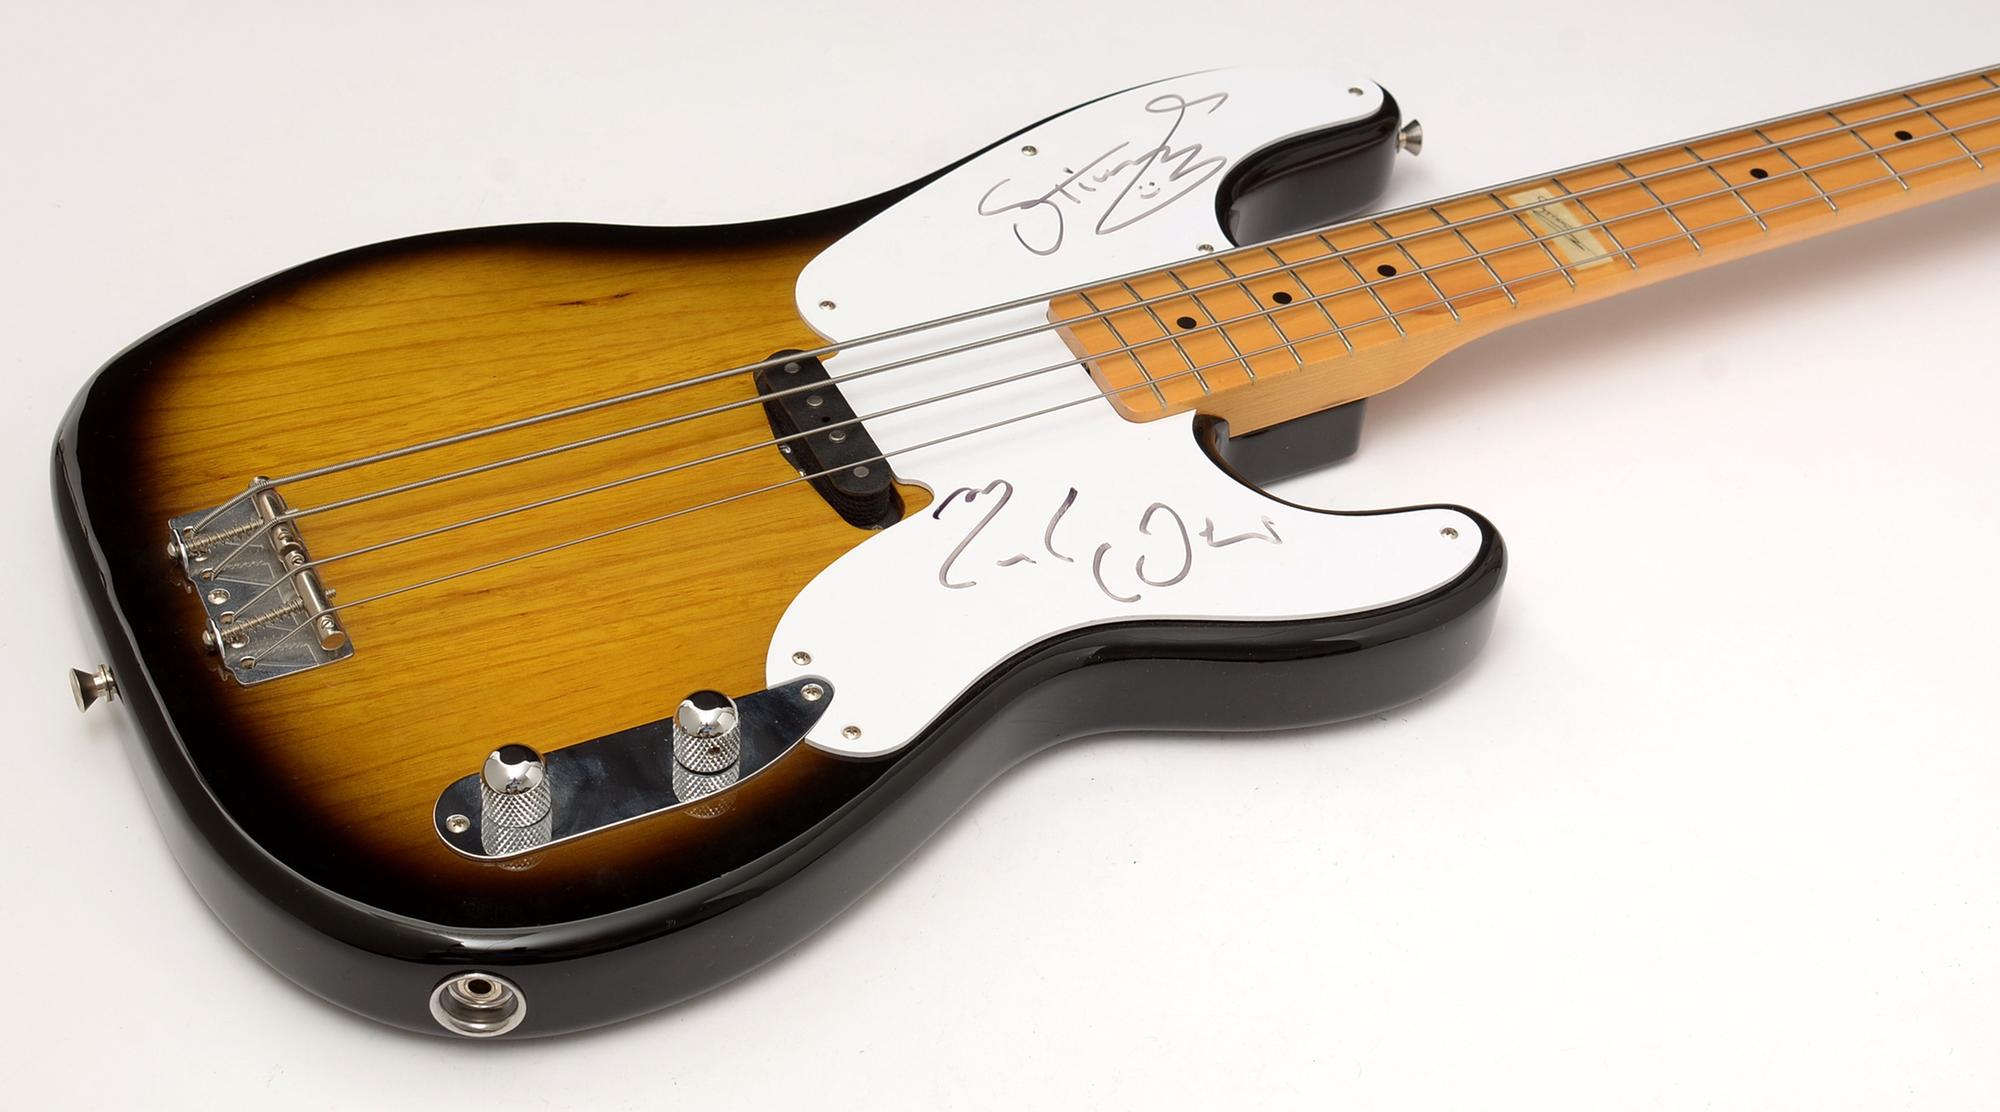 Guitar signed by music legend Sting to go up for auction